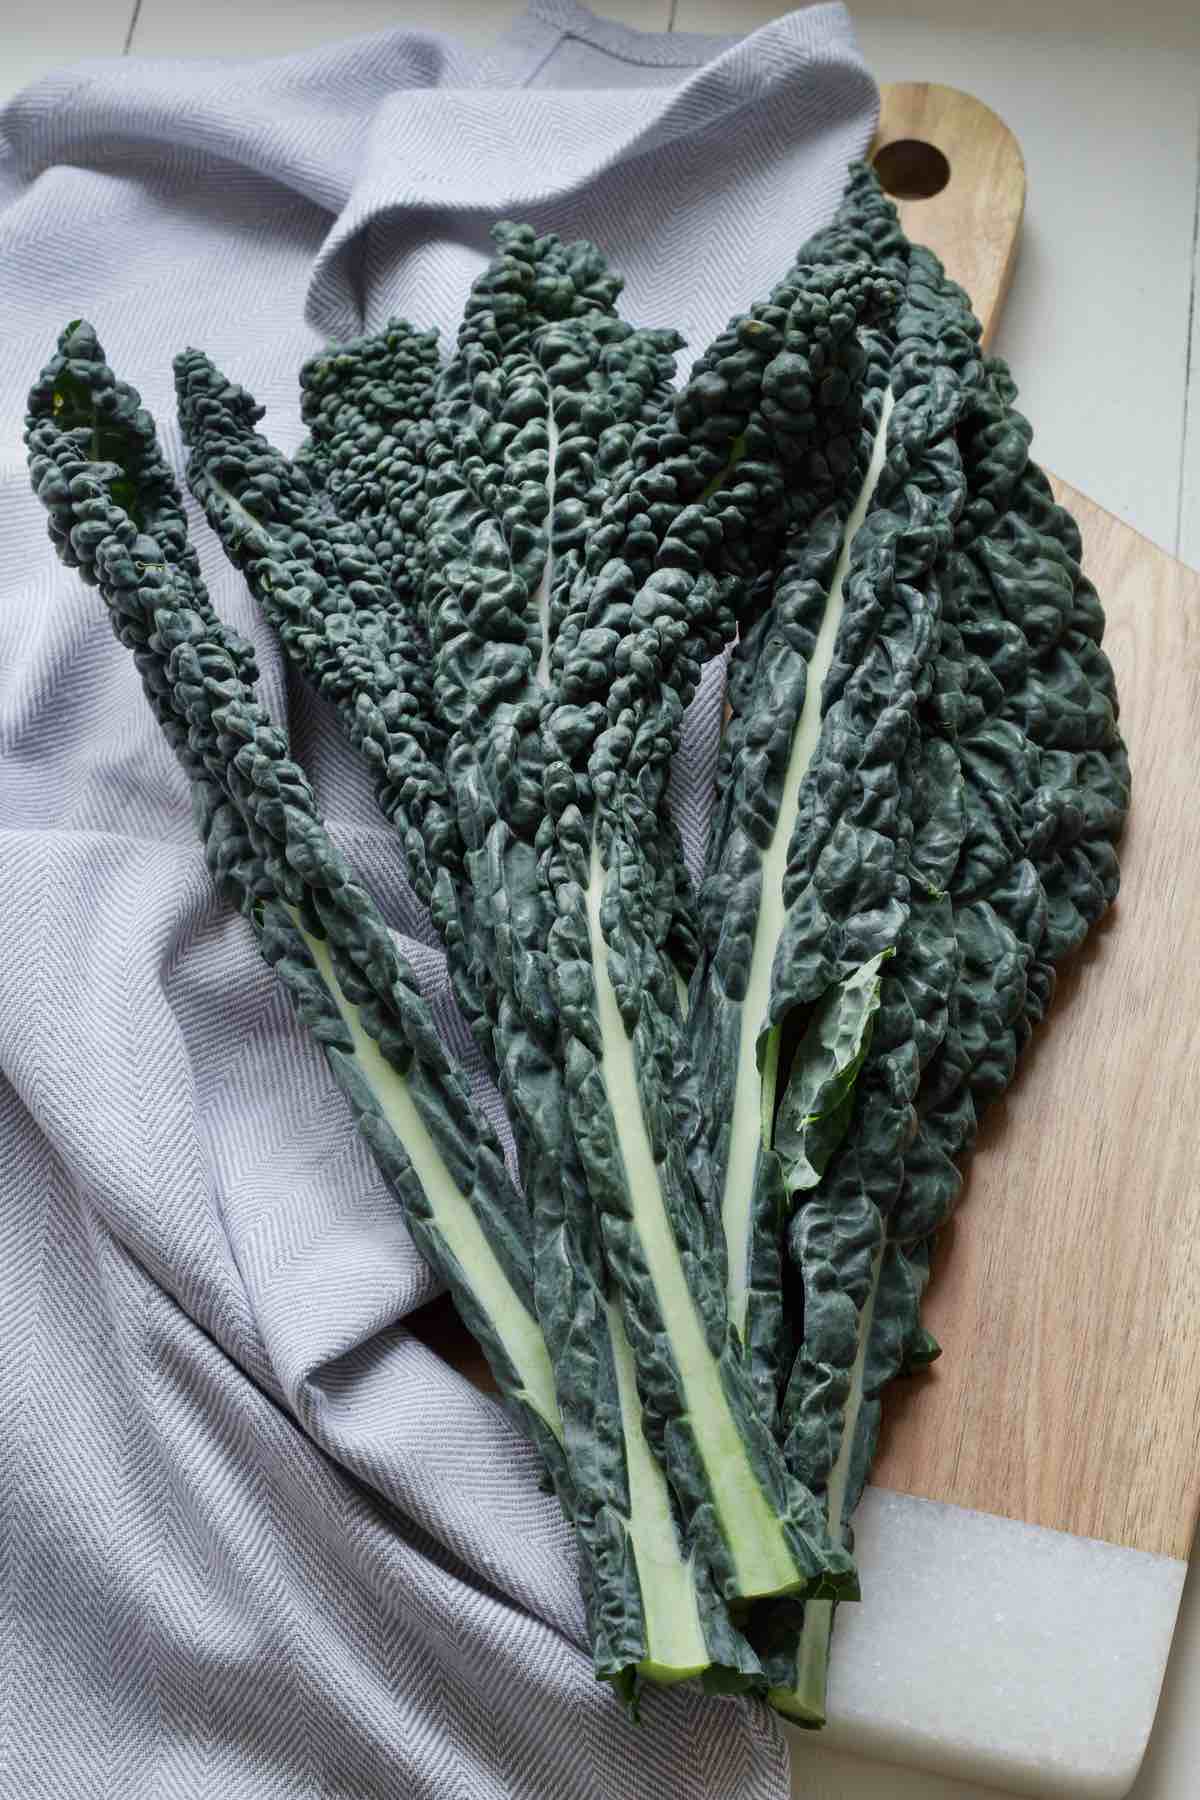 Bunch of cavolo nero leaves on a board.